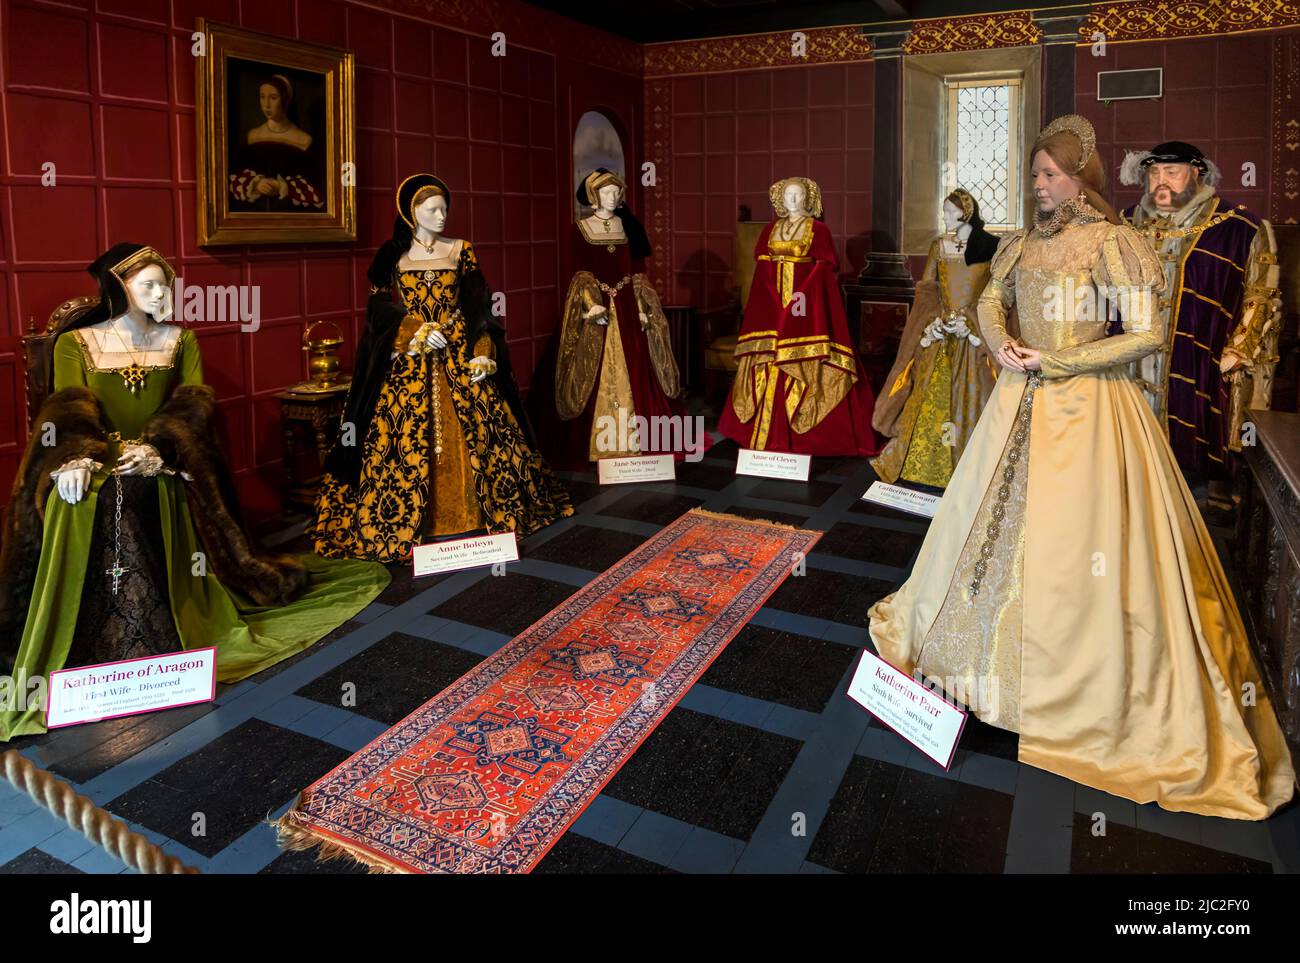 Historical display of Henry VIII and his 6 wives at Sudeley Castle, a 15th century, Grade I listed castle, Sudeley, Gloucestershire, England, UK. Stock Photo